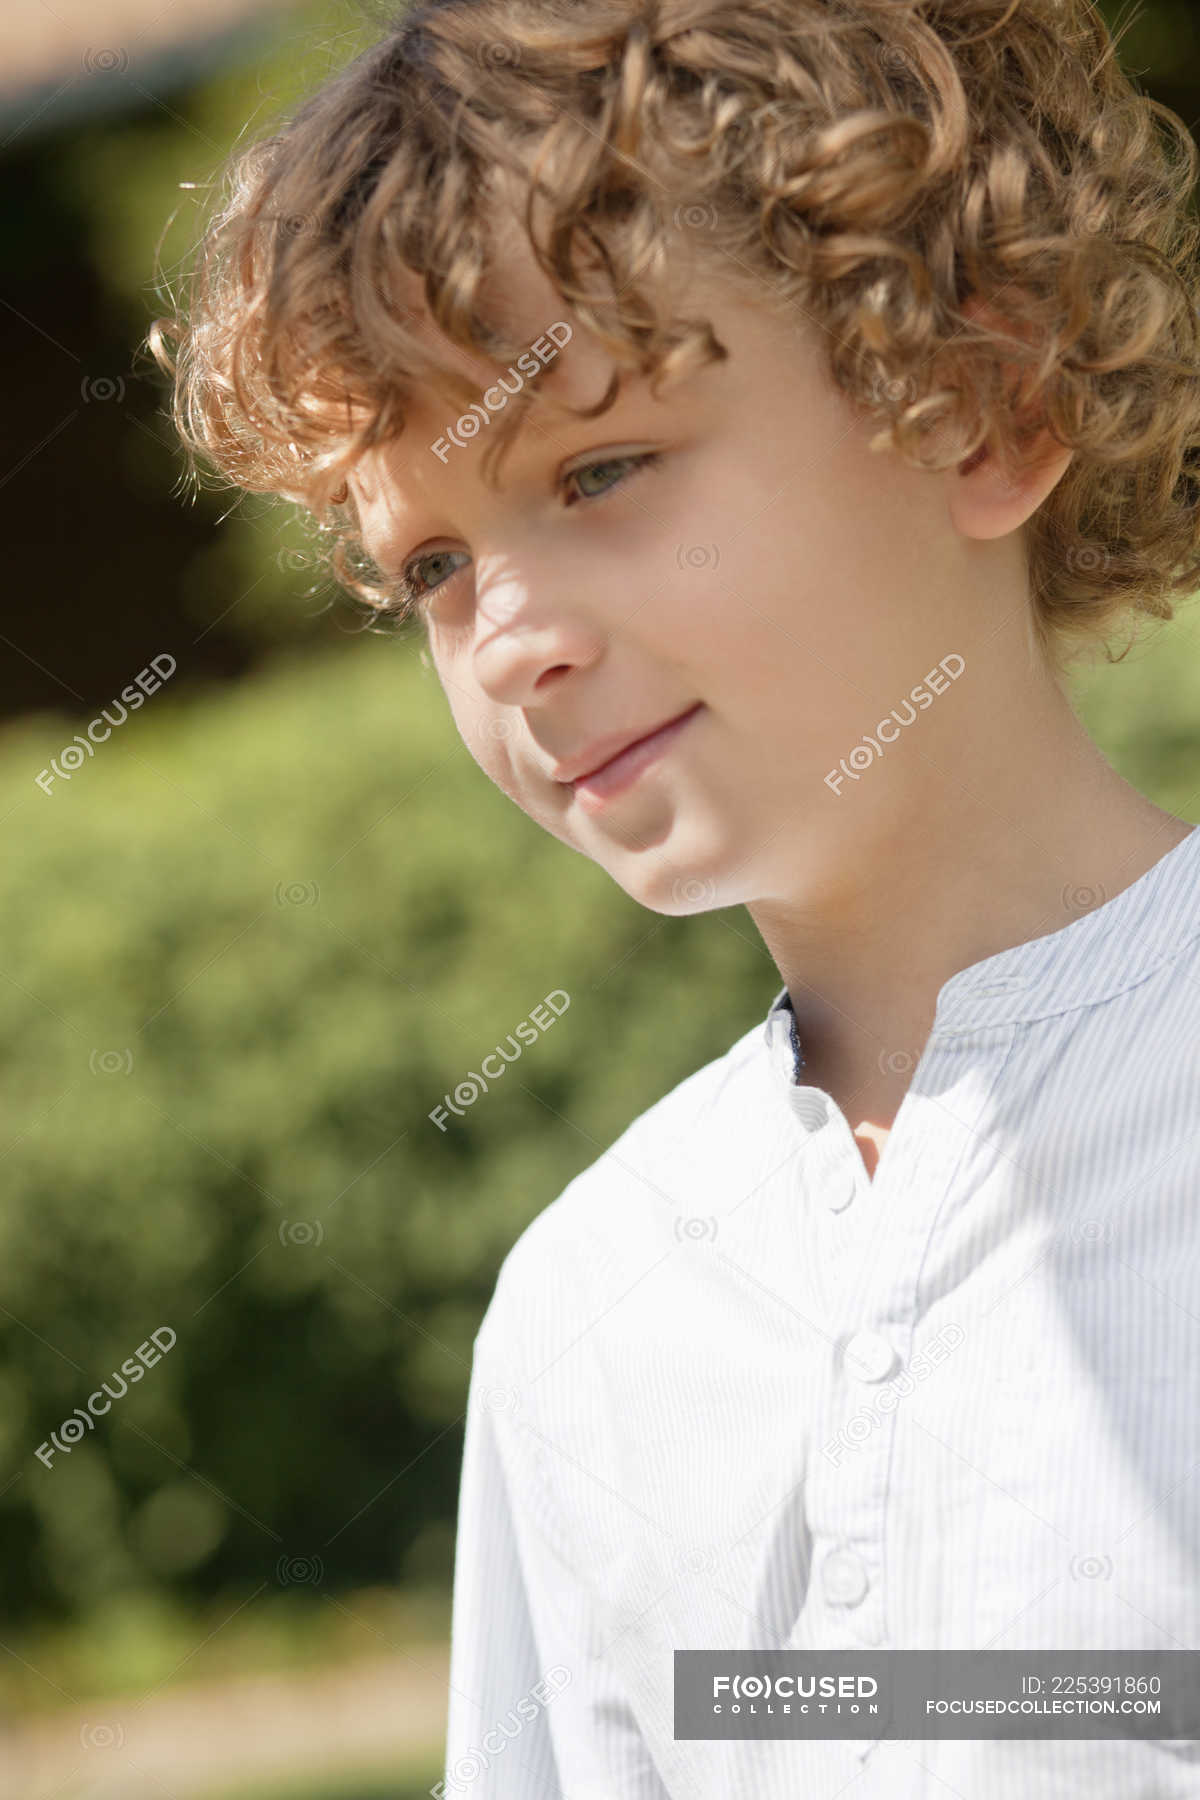 Close-up of smiling boy with curly hair day dreaming in nature — outdoors,  contemplation - Stock Photo | #225391860